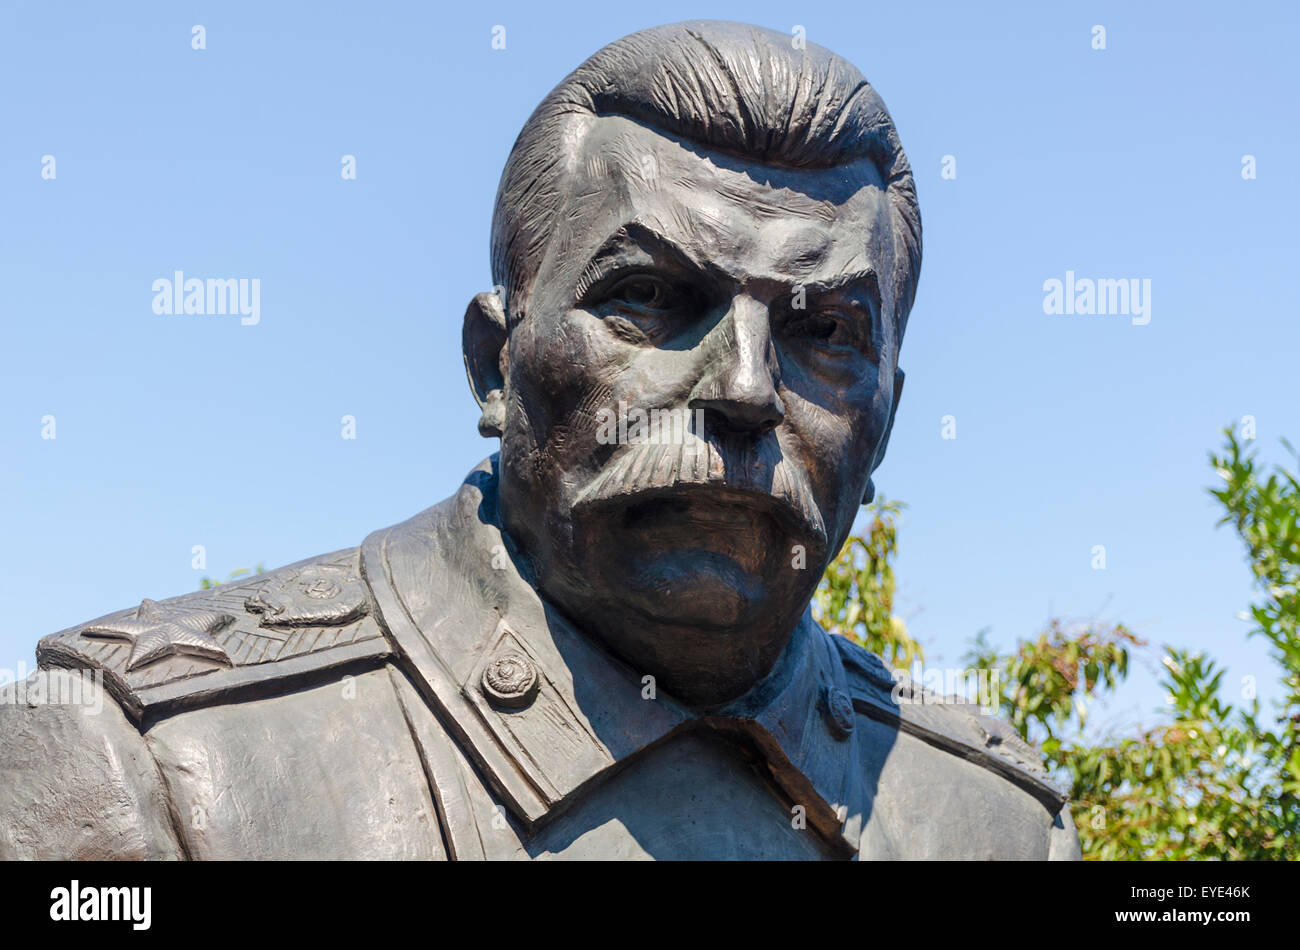 Yalta, RUSSIA - July 3: Opening of the monument in honor of the 70th anniversary of the Yalta Conference, the leaders of the 'Big Three', held at the Livadia Palace from 4 - 11 February 1945. 2015 Stock Photo